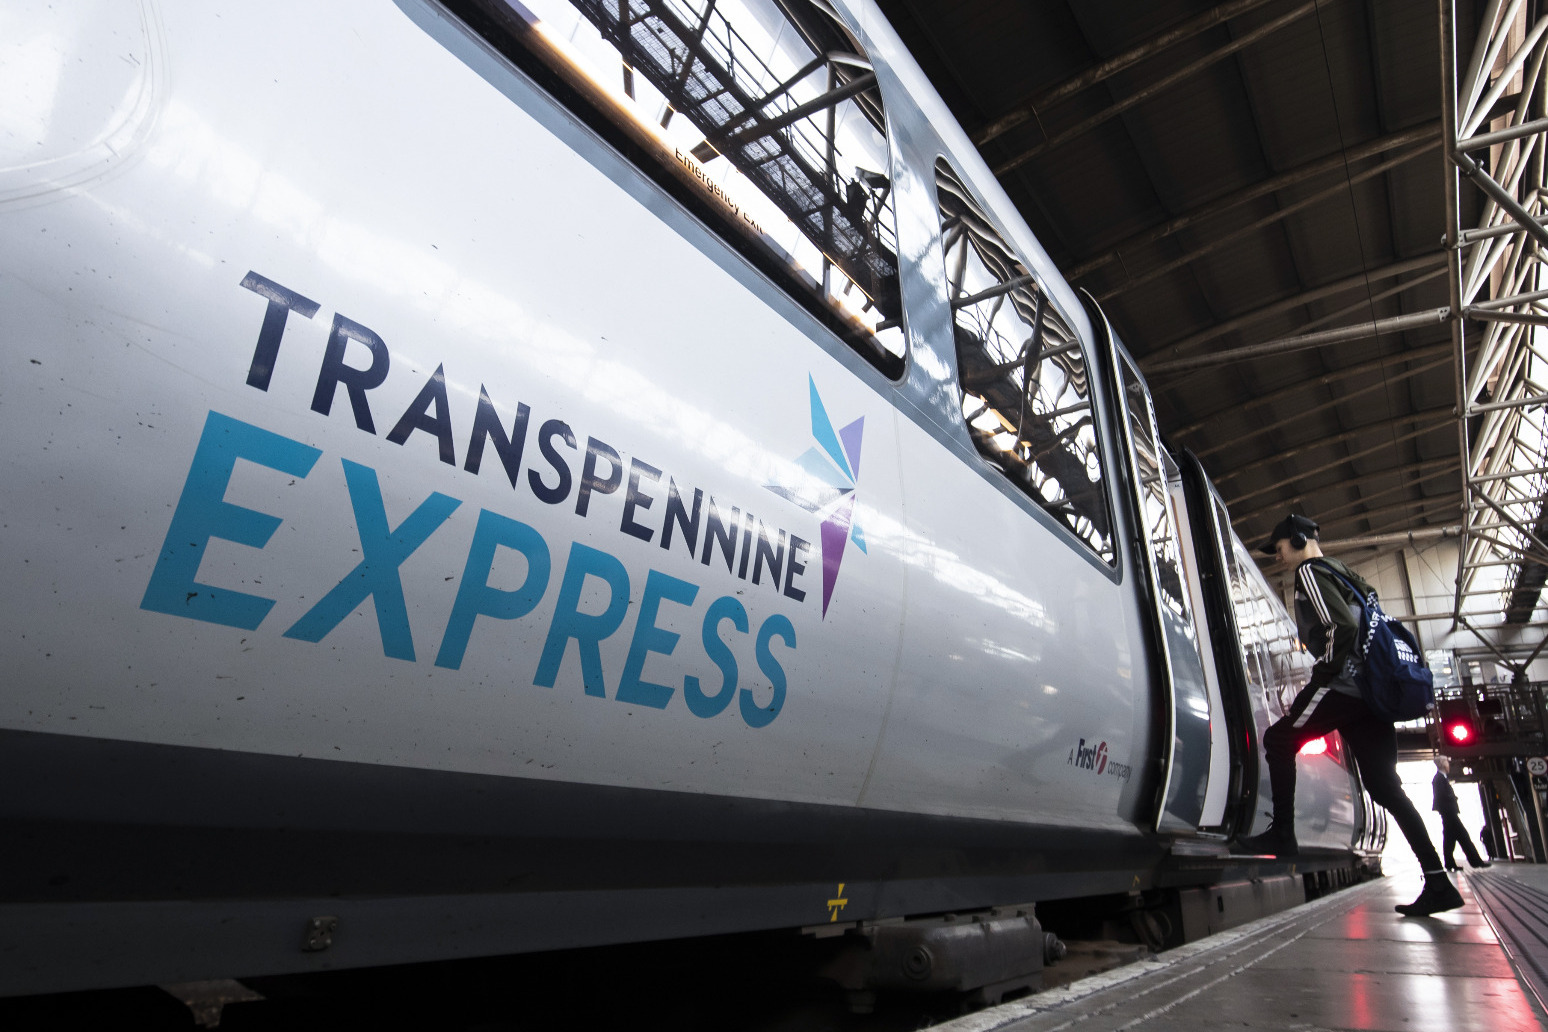 No option off the table for TransPennine Express 